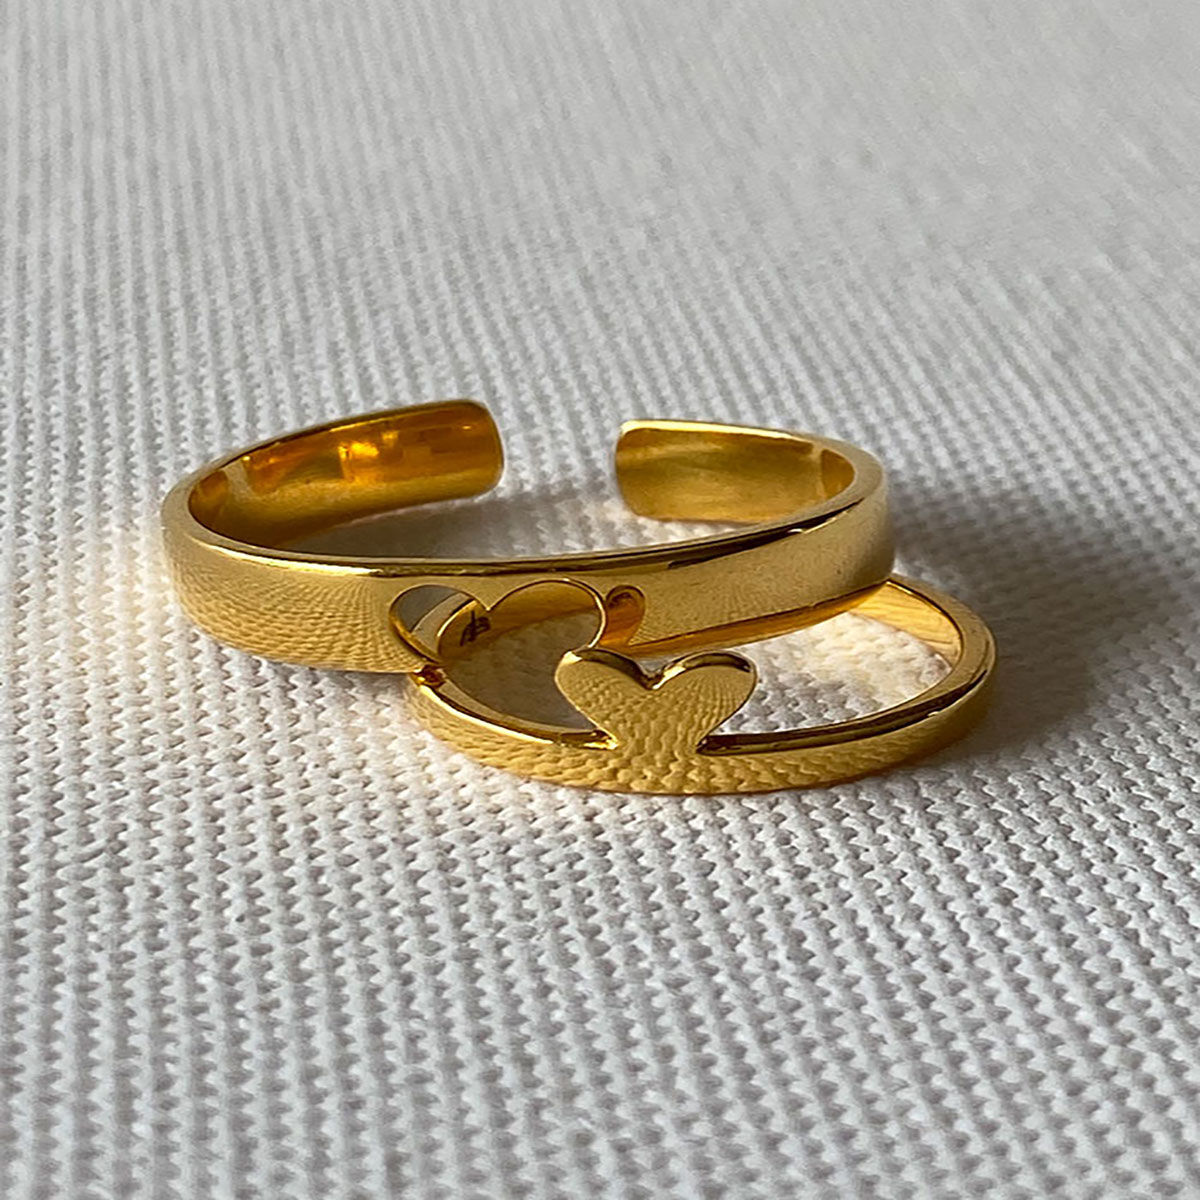 BRJ 22 Carat Gold Rings for Couple at Rs 4150 in Ludhiana | ID: 21863636291-saigonsouth.com.vn